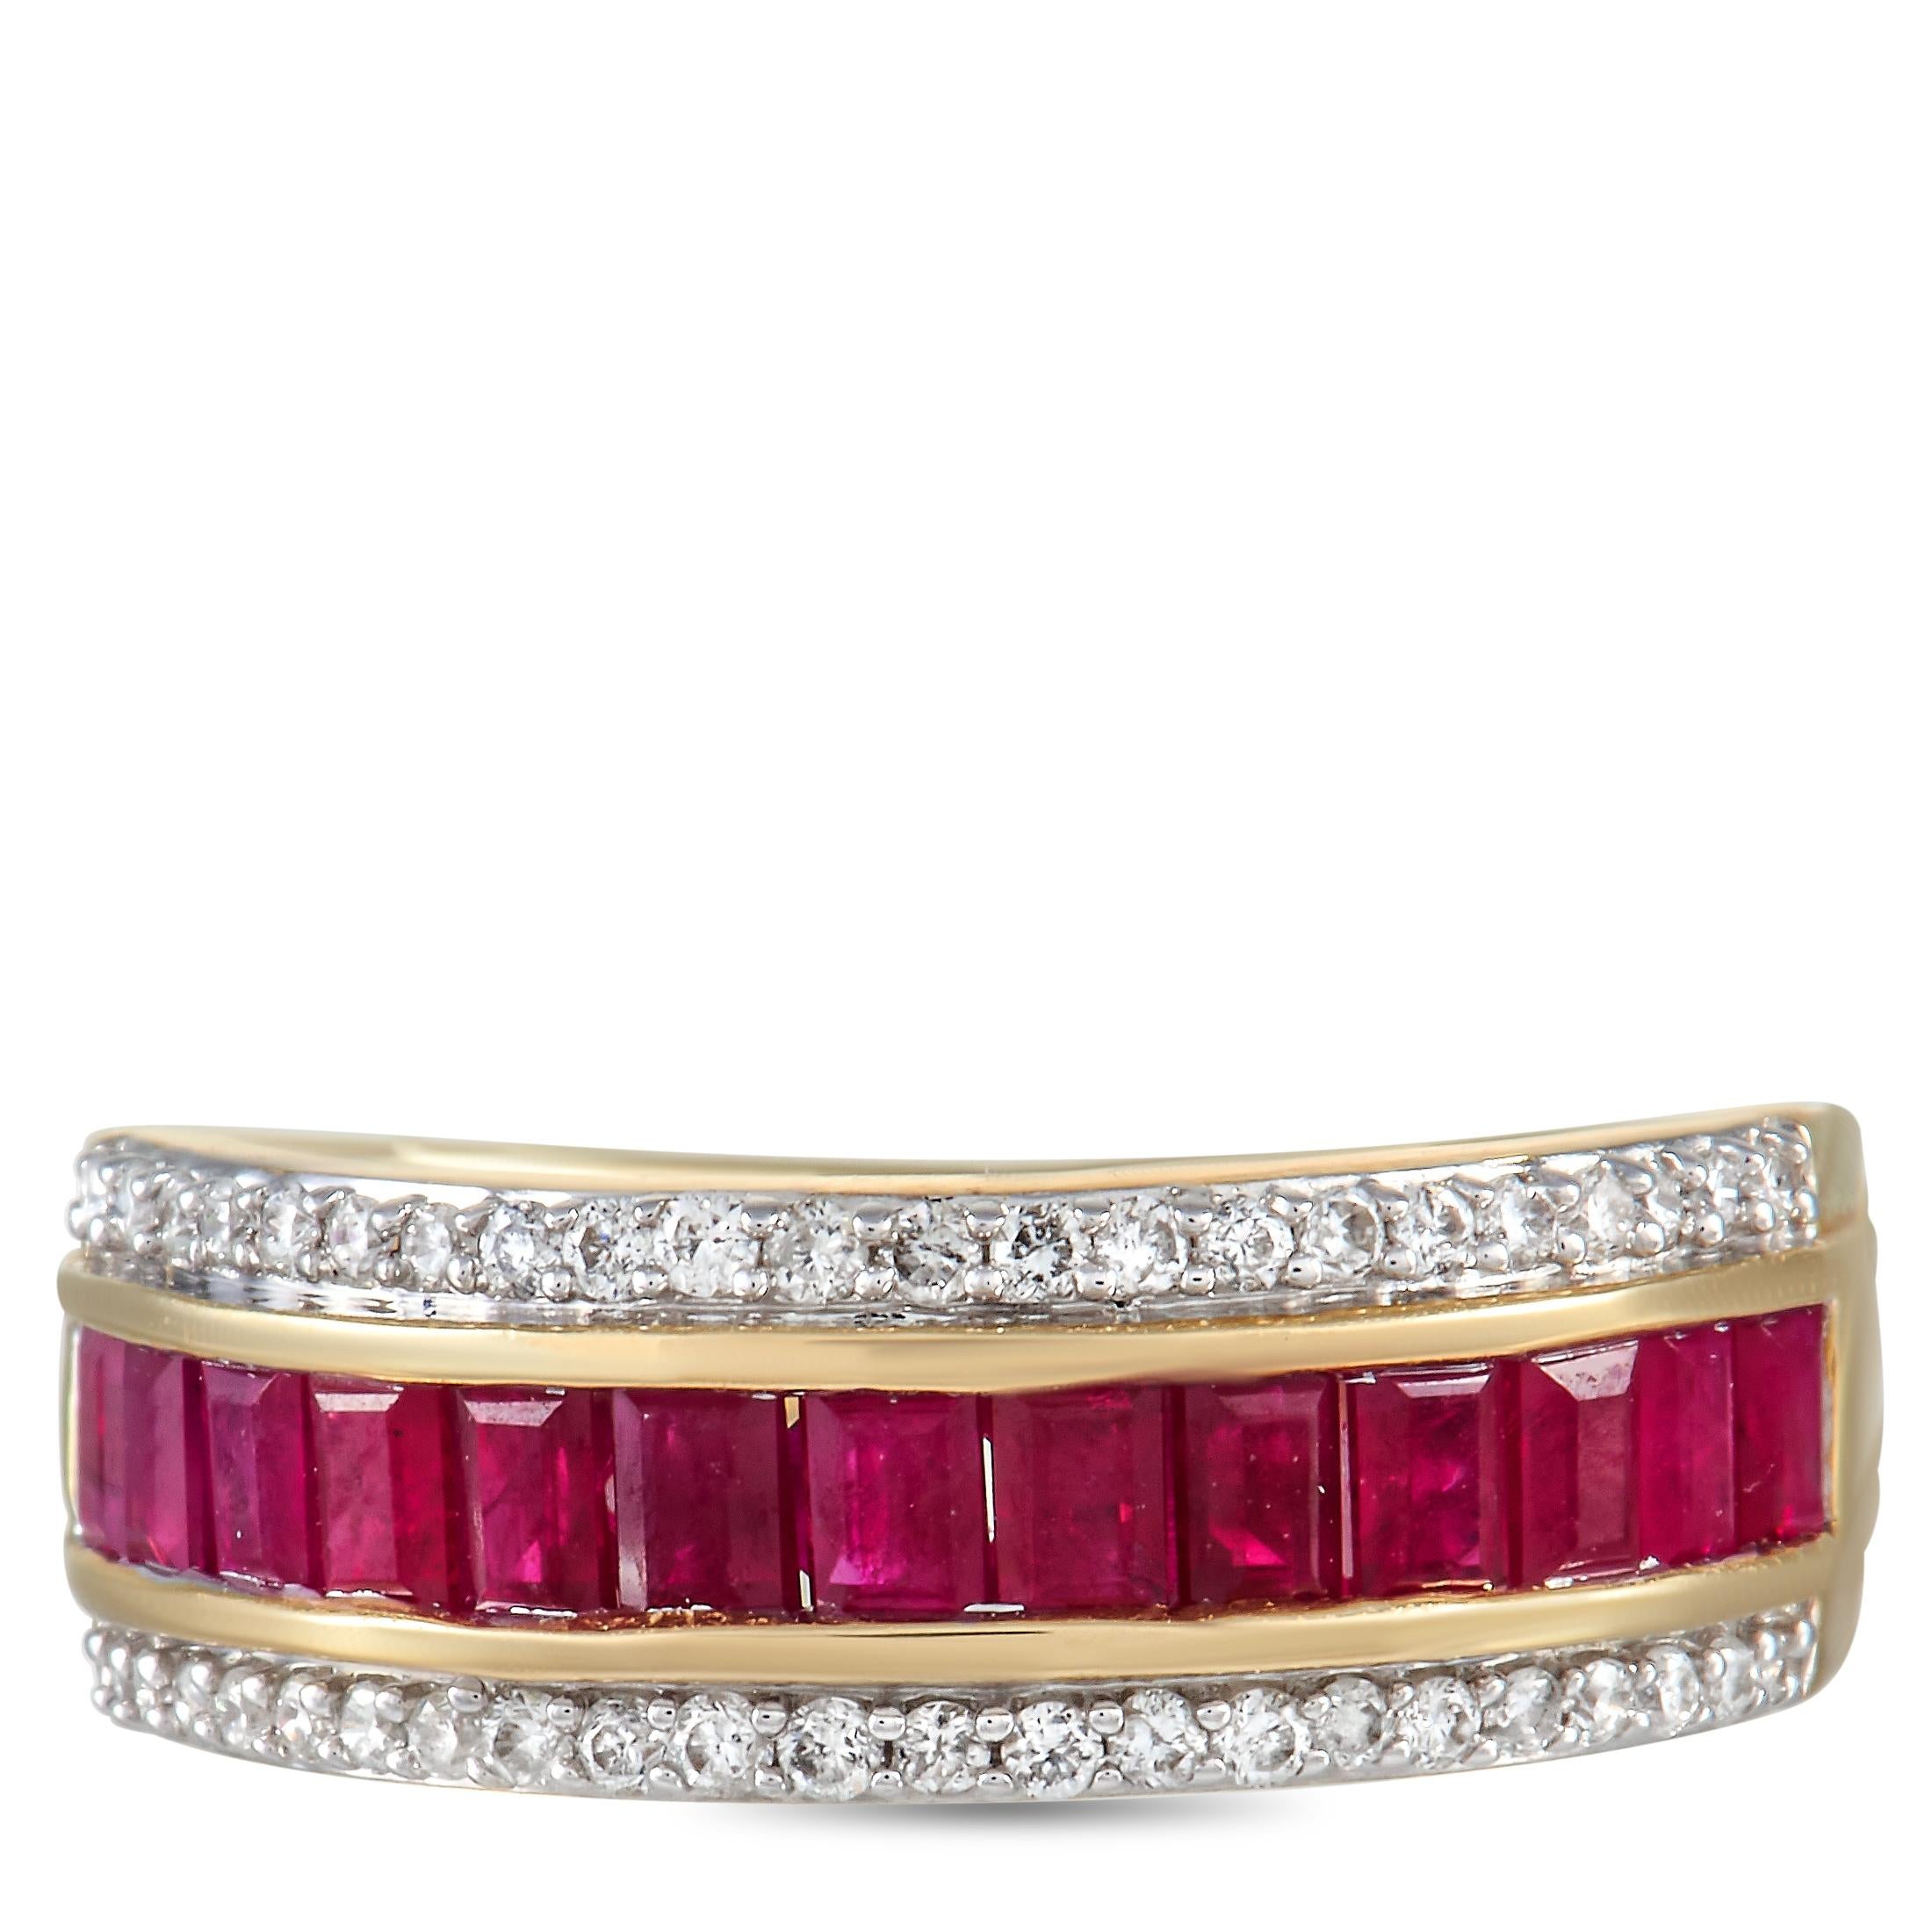 10k ruby and diamond ring